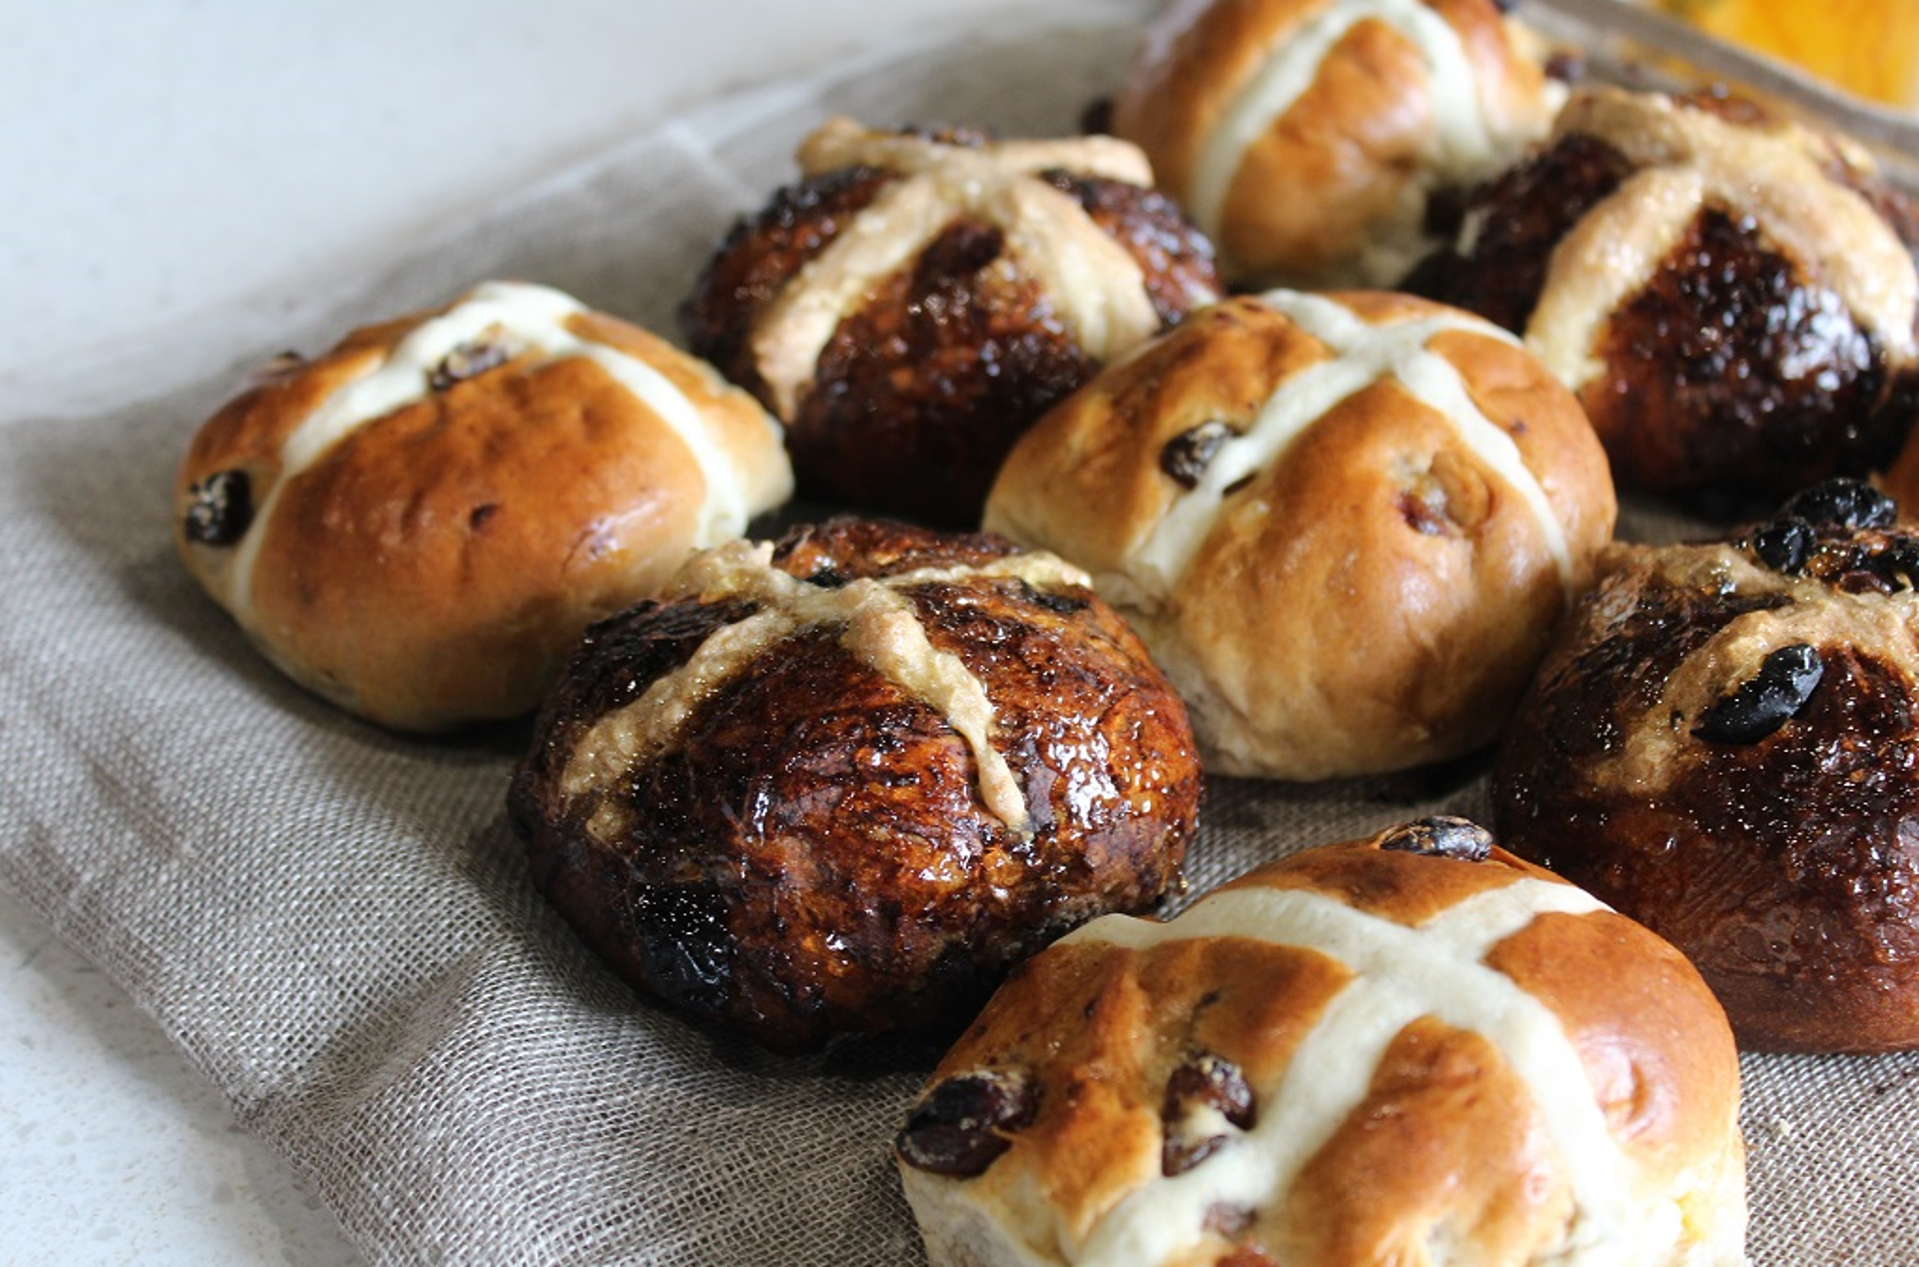 Chocolate and Fruit Checkerboard Hot Cross Buns